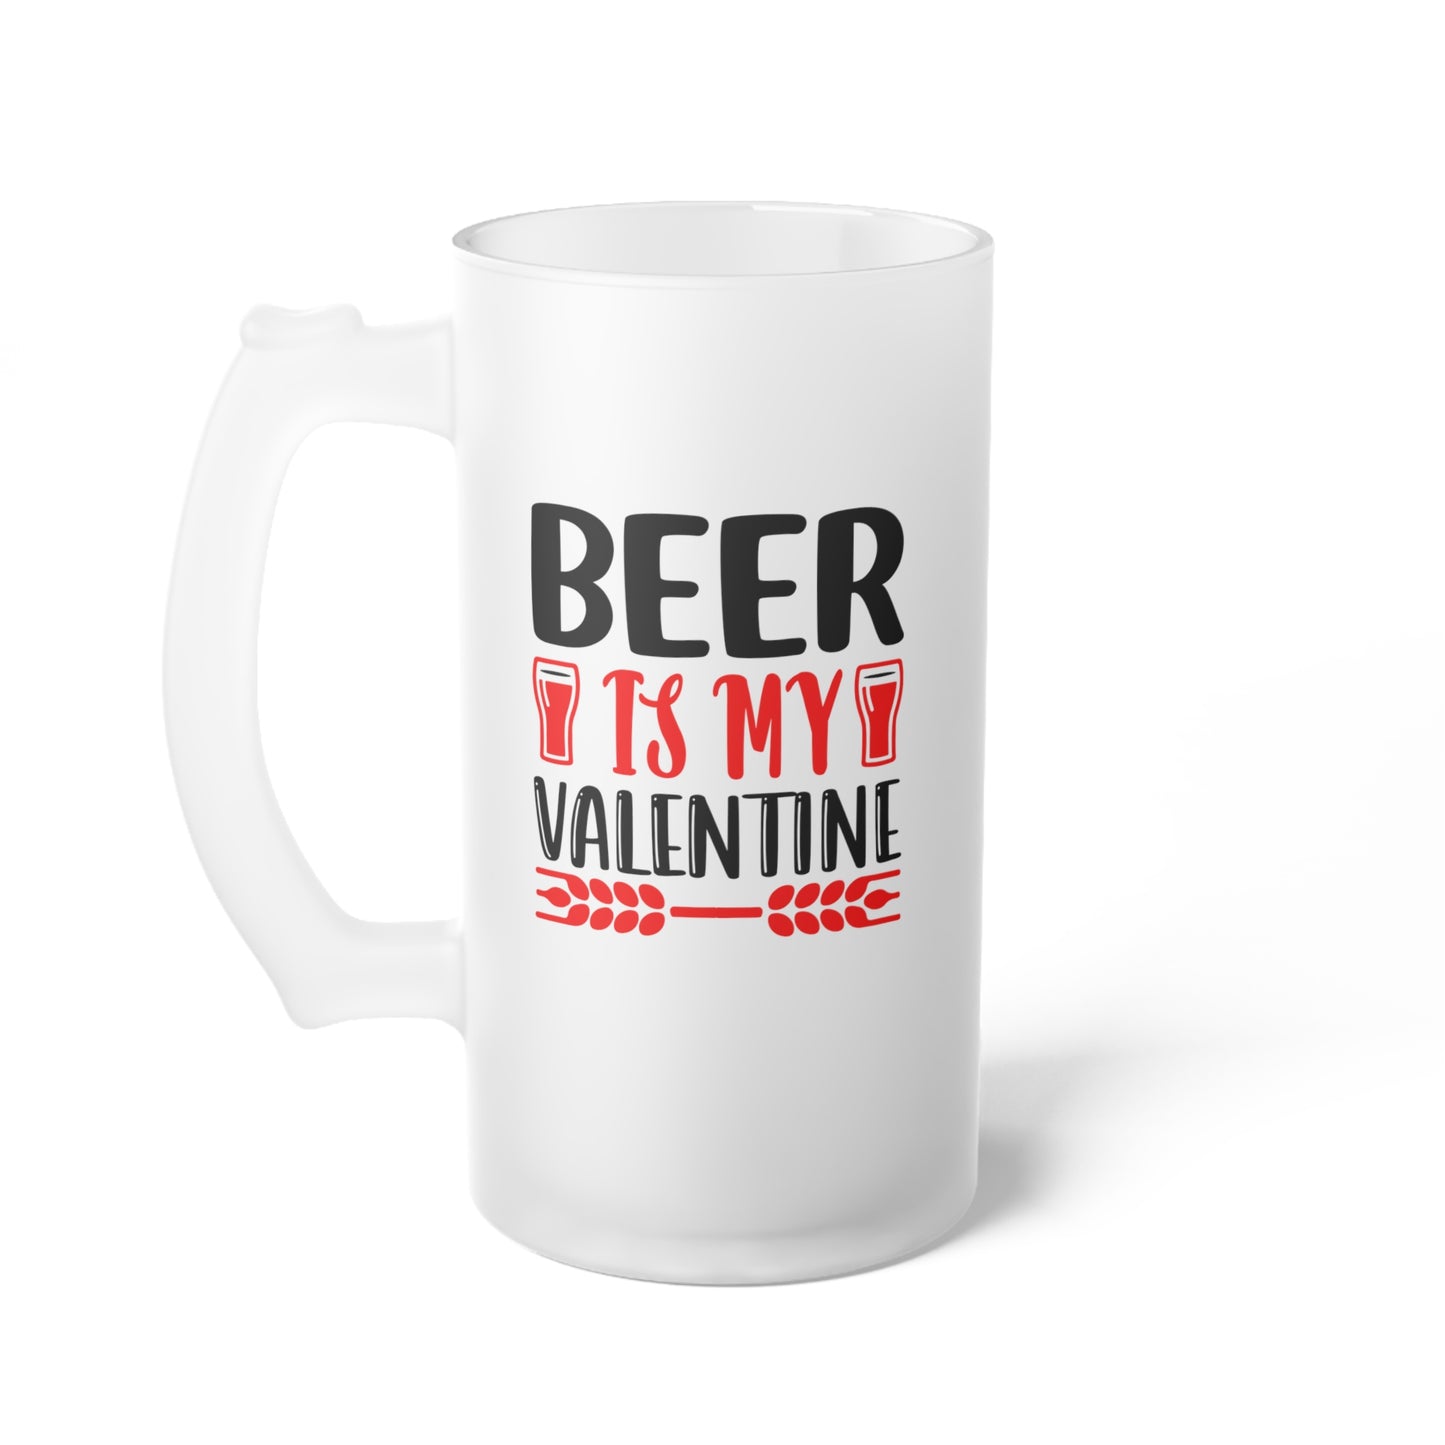 Beer Is My Valentine -  Frosted Glass Beer Mug